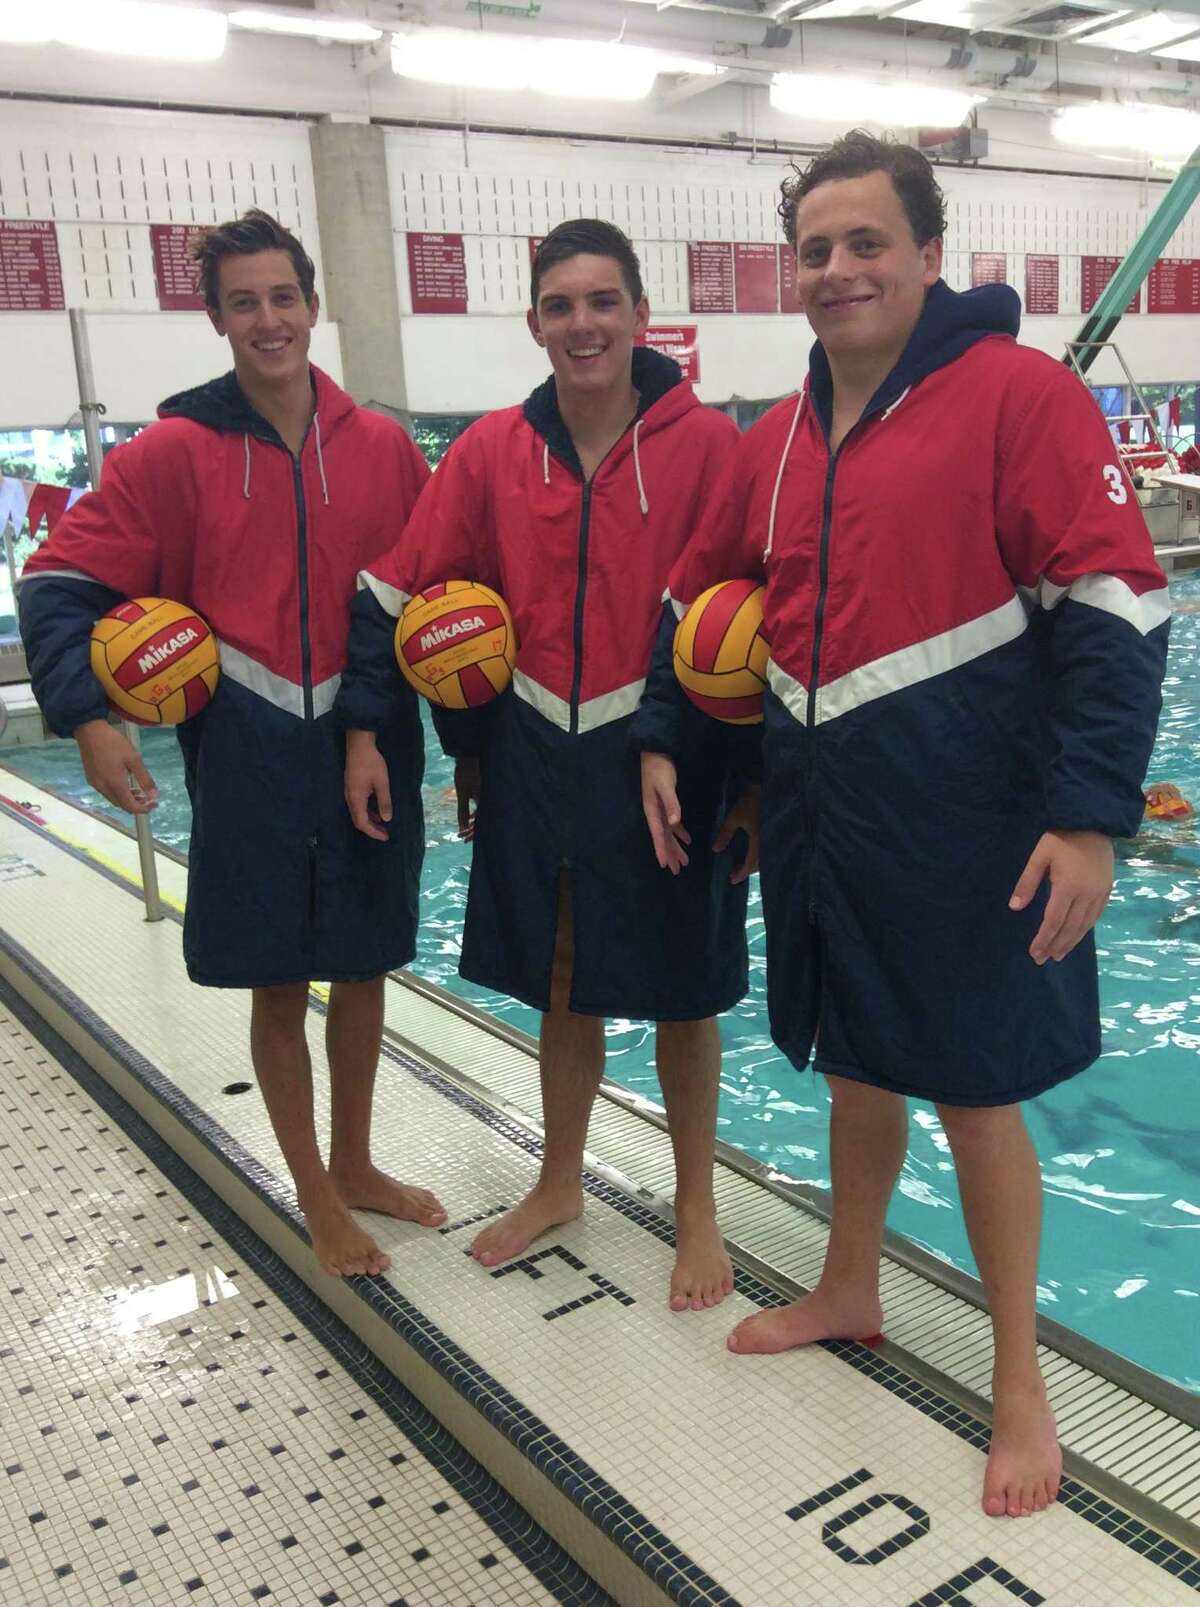 From left to right, Niki de la Sierra, Kyle Laufenberg and Tegan D’Agostino are senior captains on the Greenwich High School water polo team. September 4, 2018